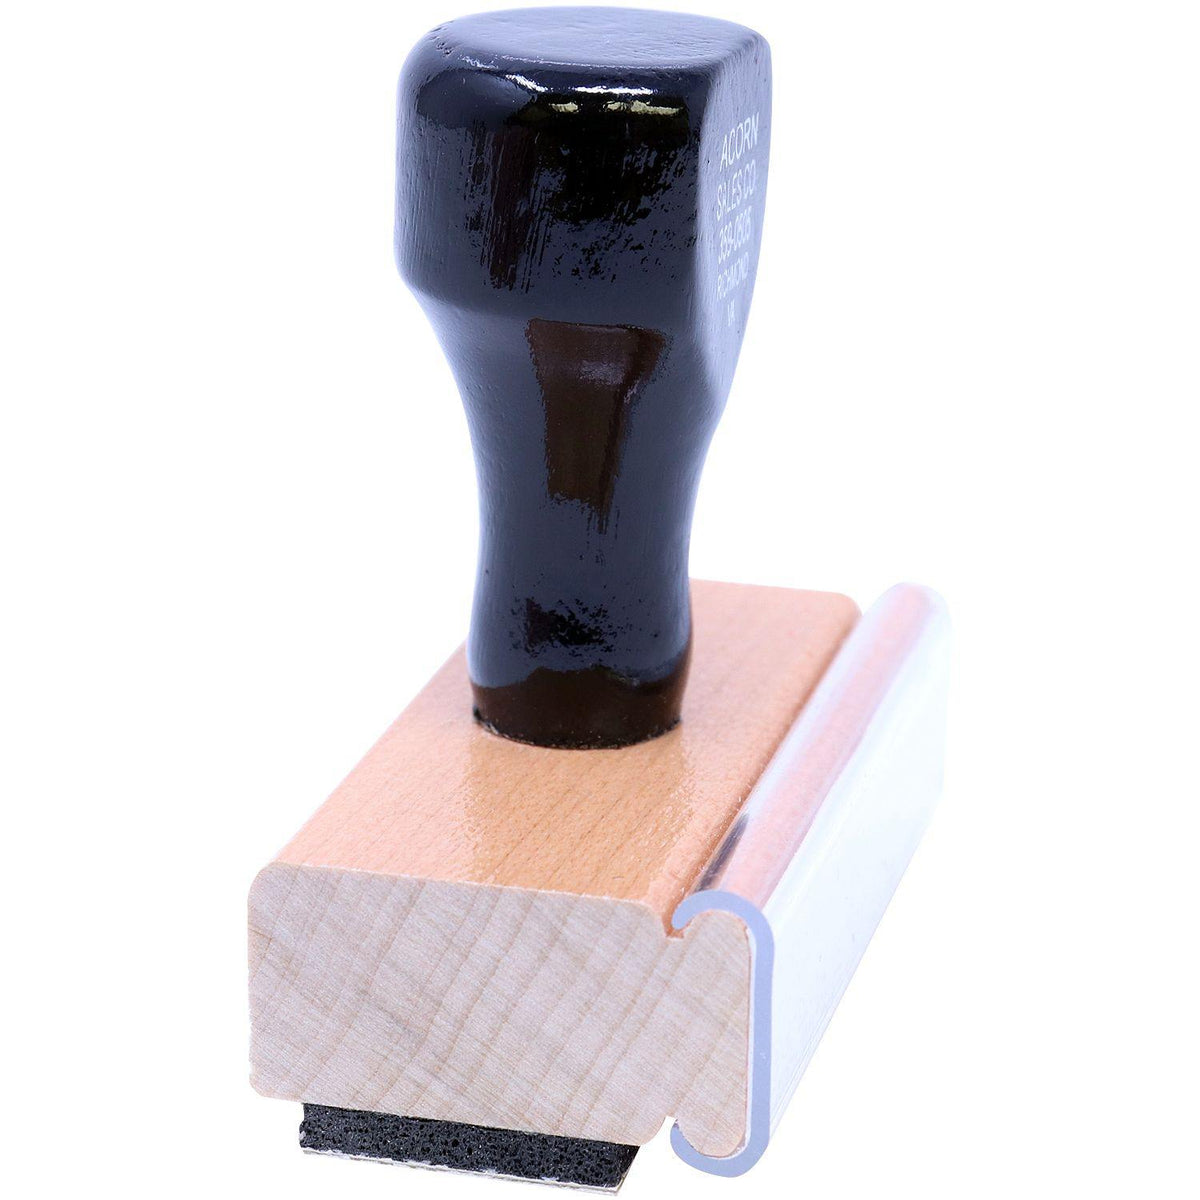 Side View of Large Received Rubber Stamp at an Angle